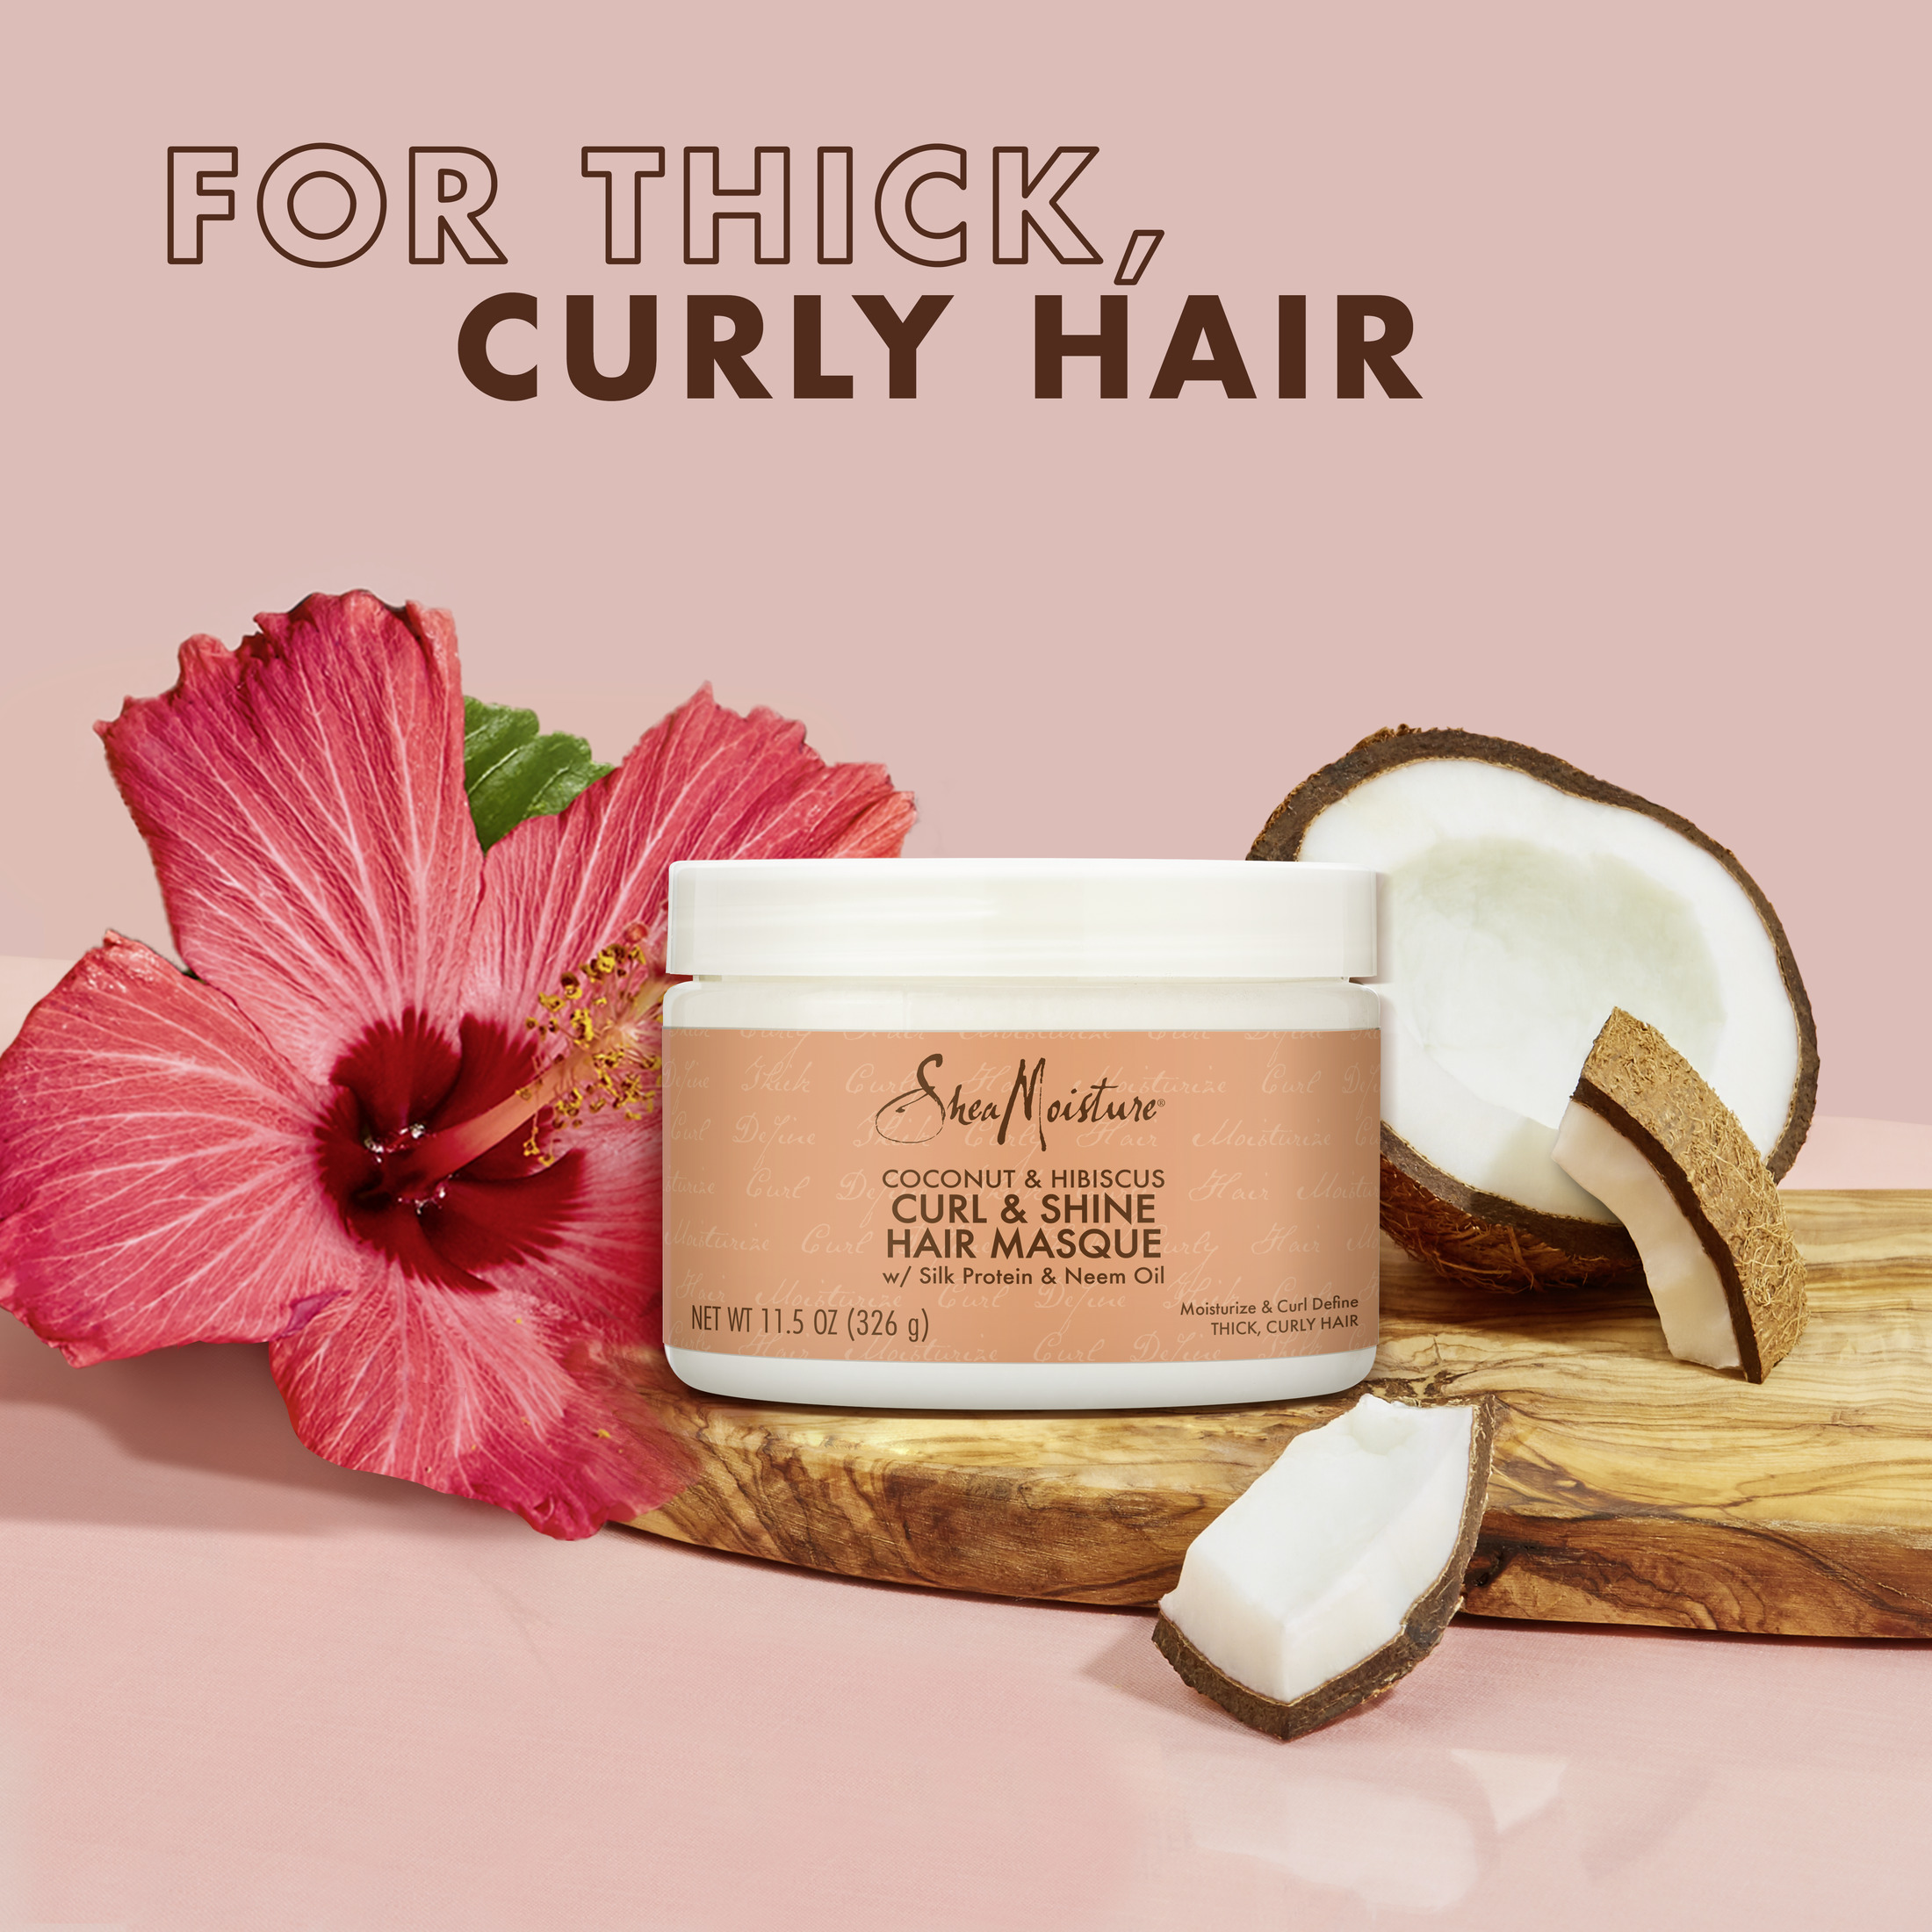 SheaMoisture Curl and Shine Hair Mask with Shea Butter, Coconut and Hibiscus, 11.5 oz - image 3 of 7